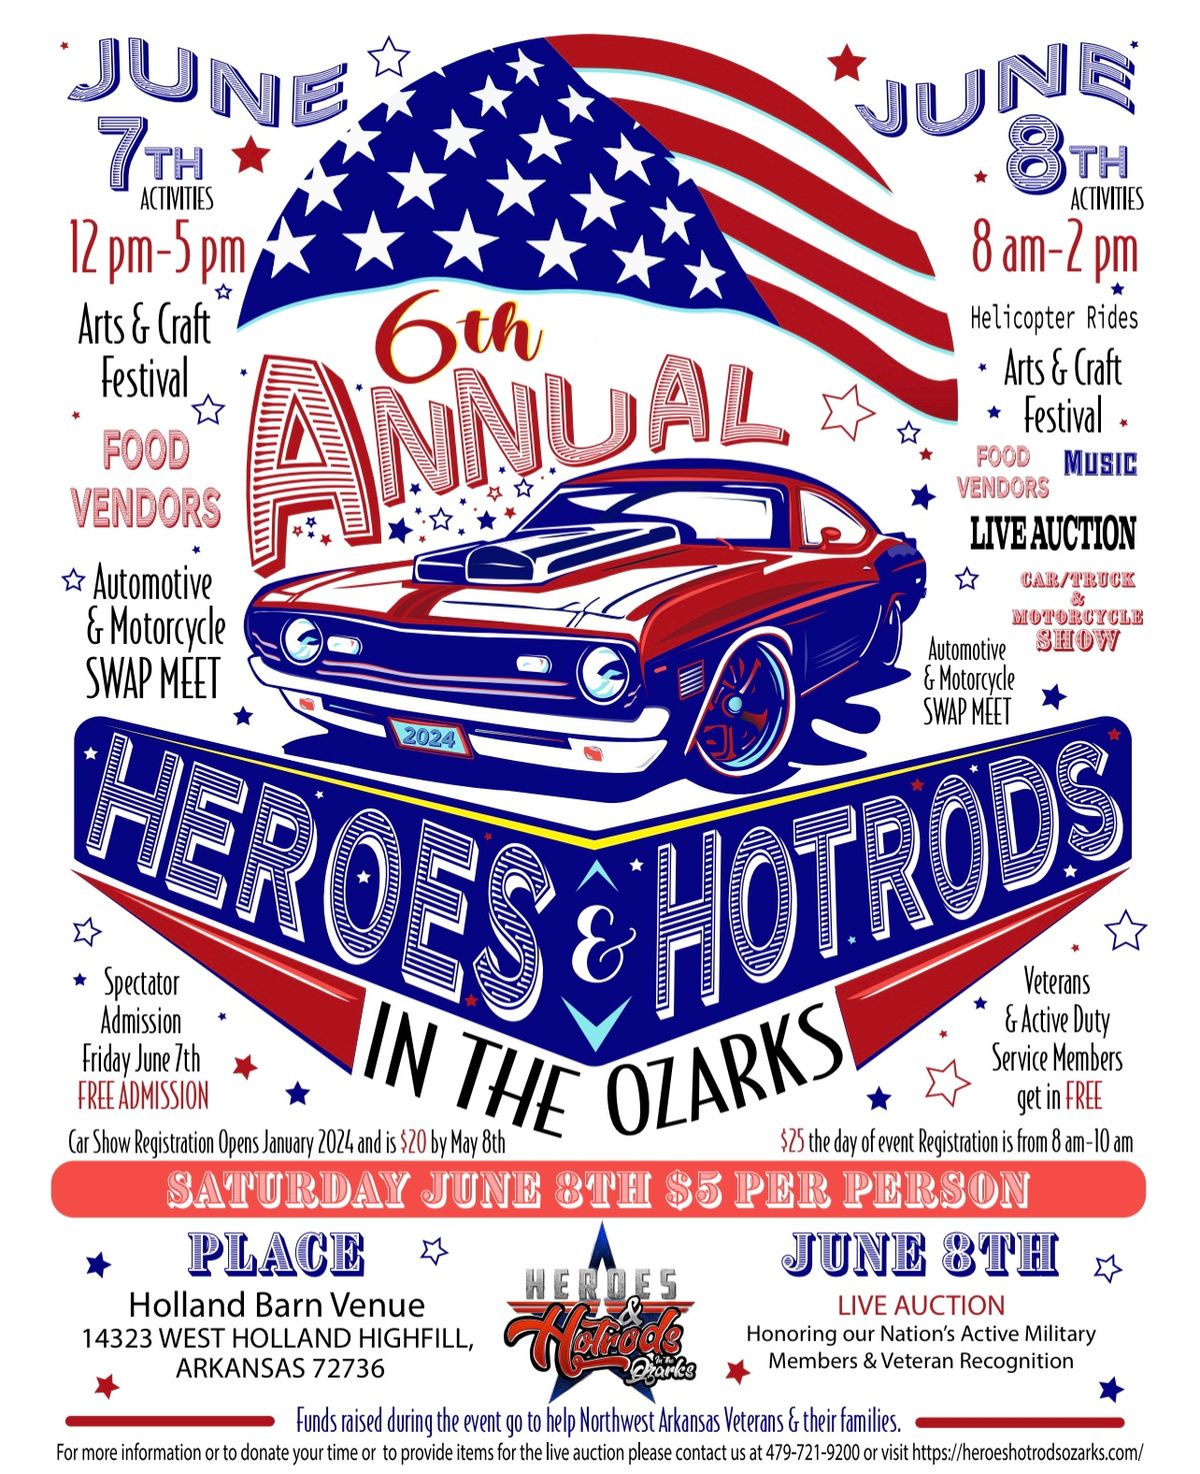 6th Annual Heroes & Hot Rods in the Ozarks 